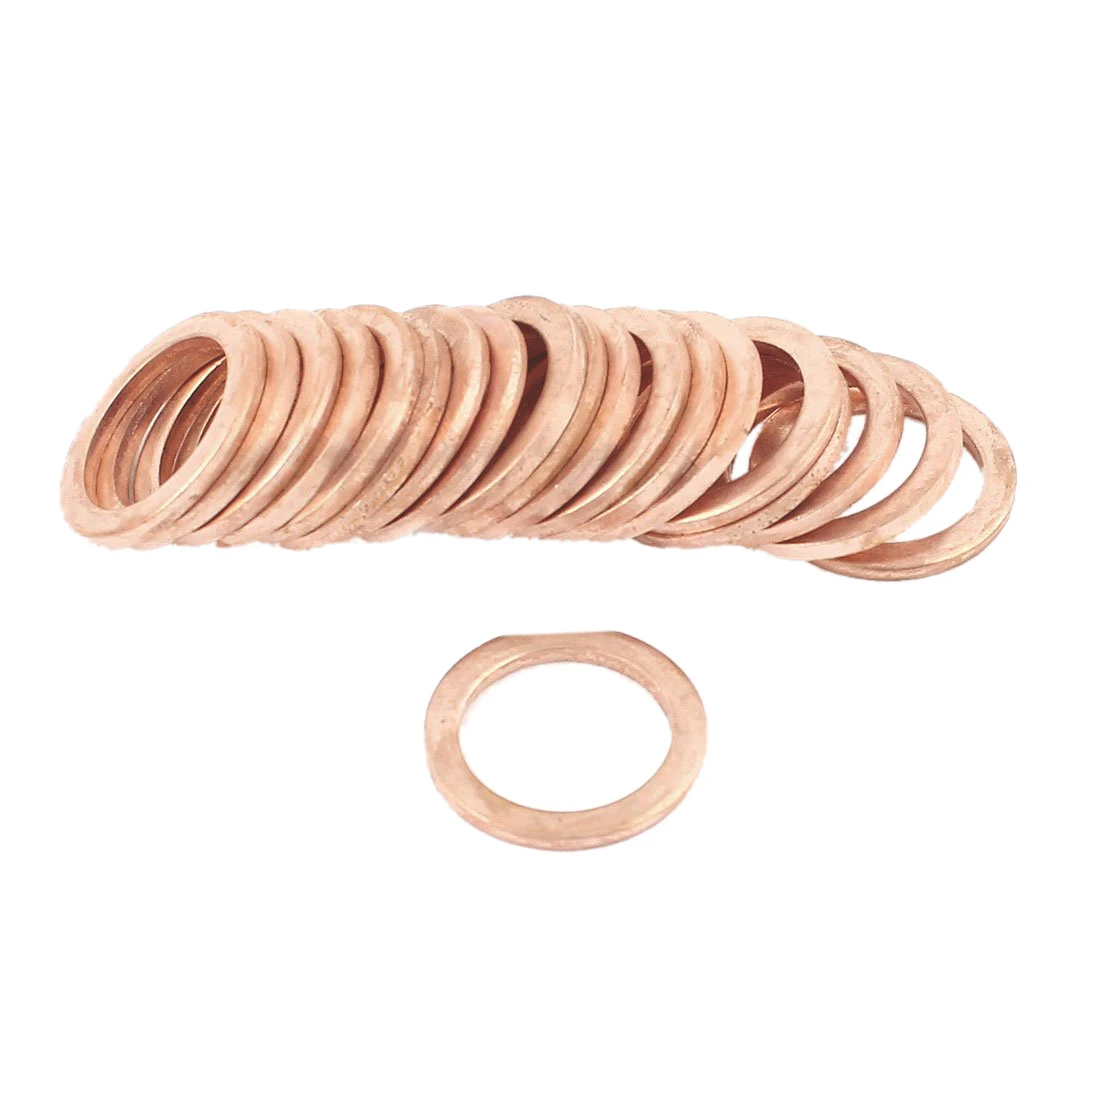 40 Pieces M14 x 20 x 1.5mm Copper Flat Washer Seal Washer 